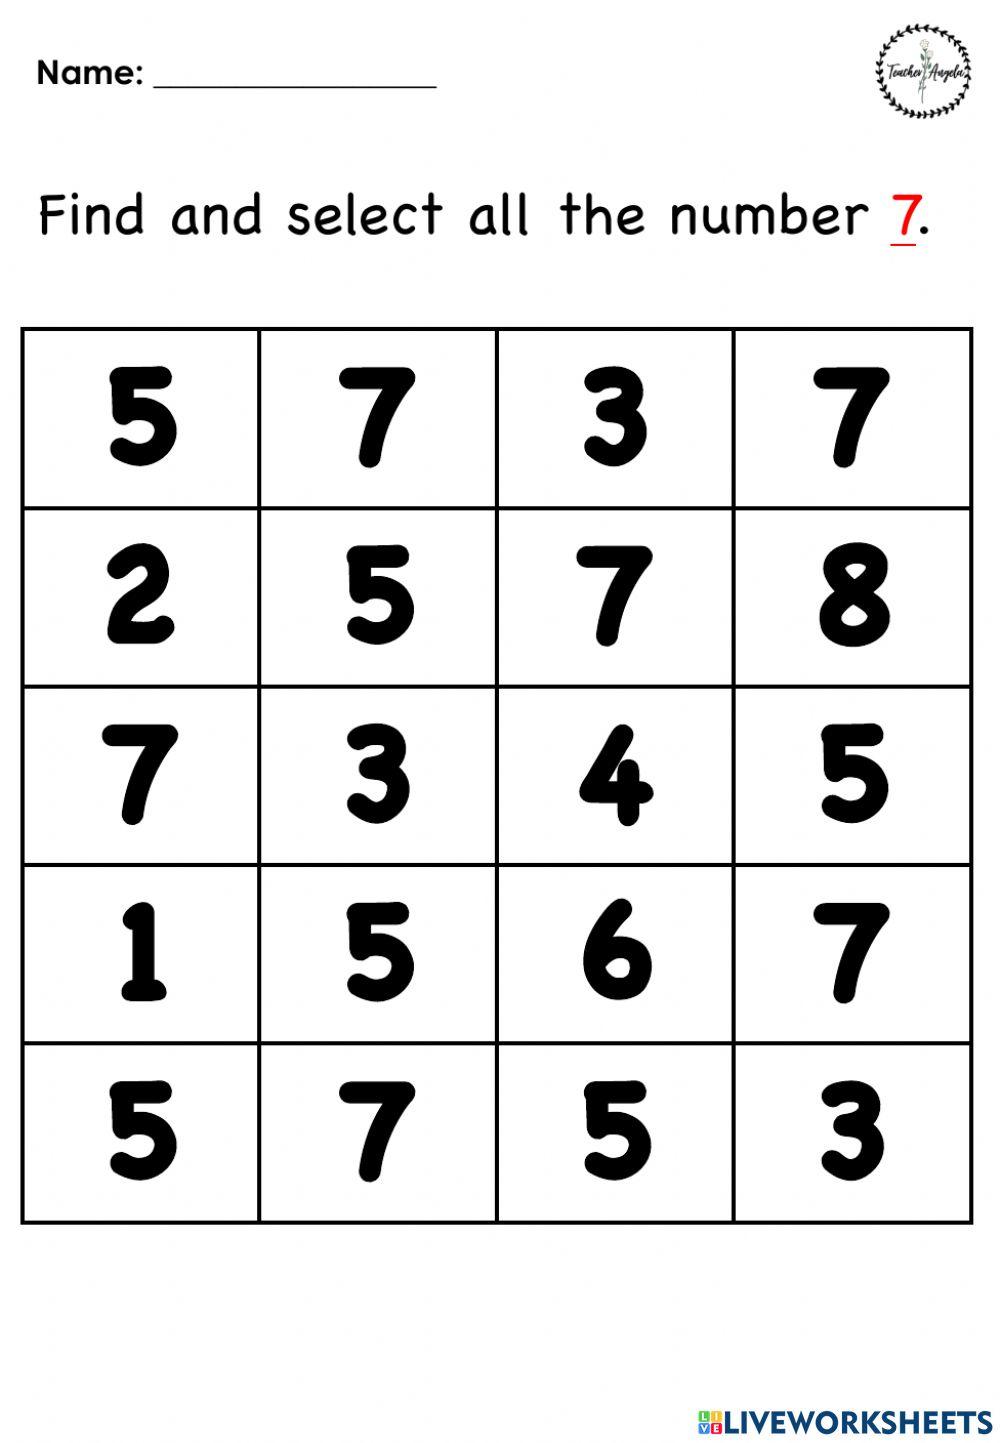 Find the number 7